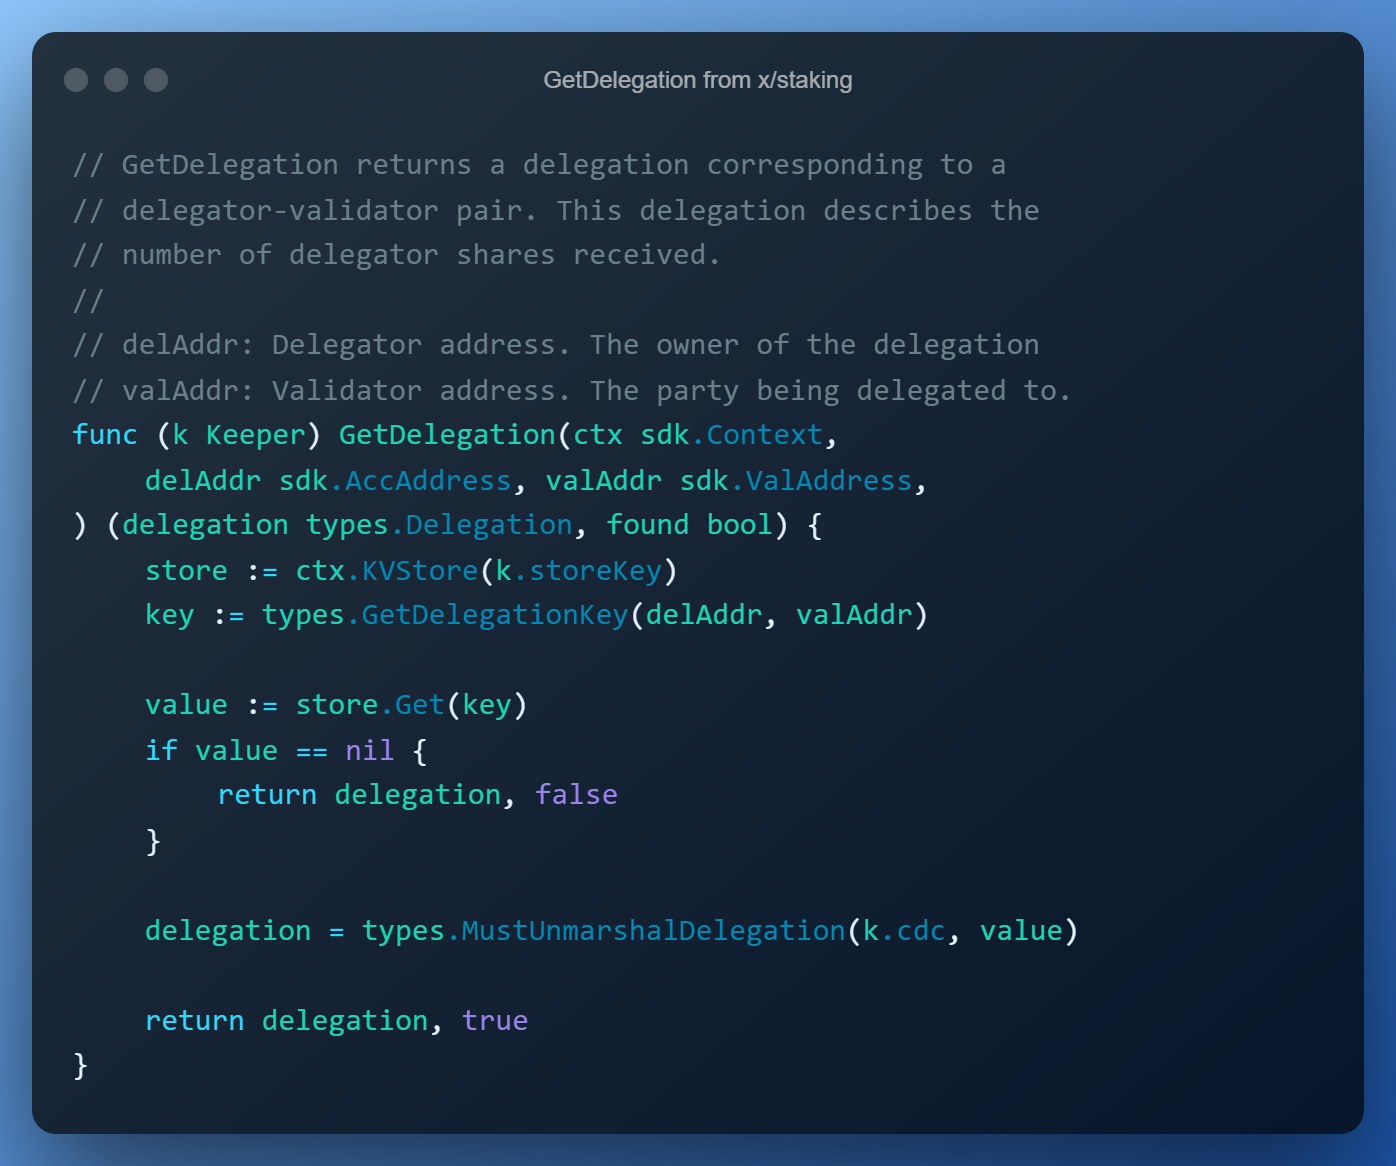 Function for reading one item from the delegations store in the x/staking module